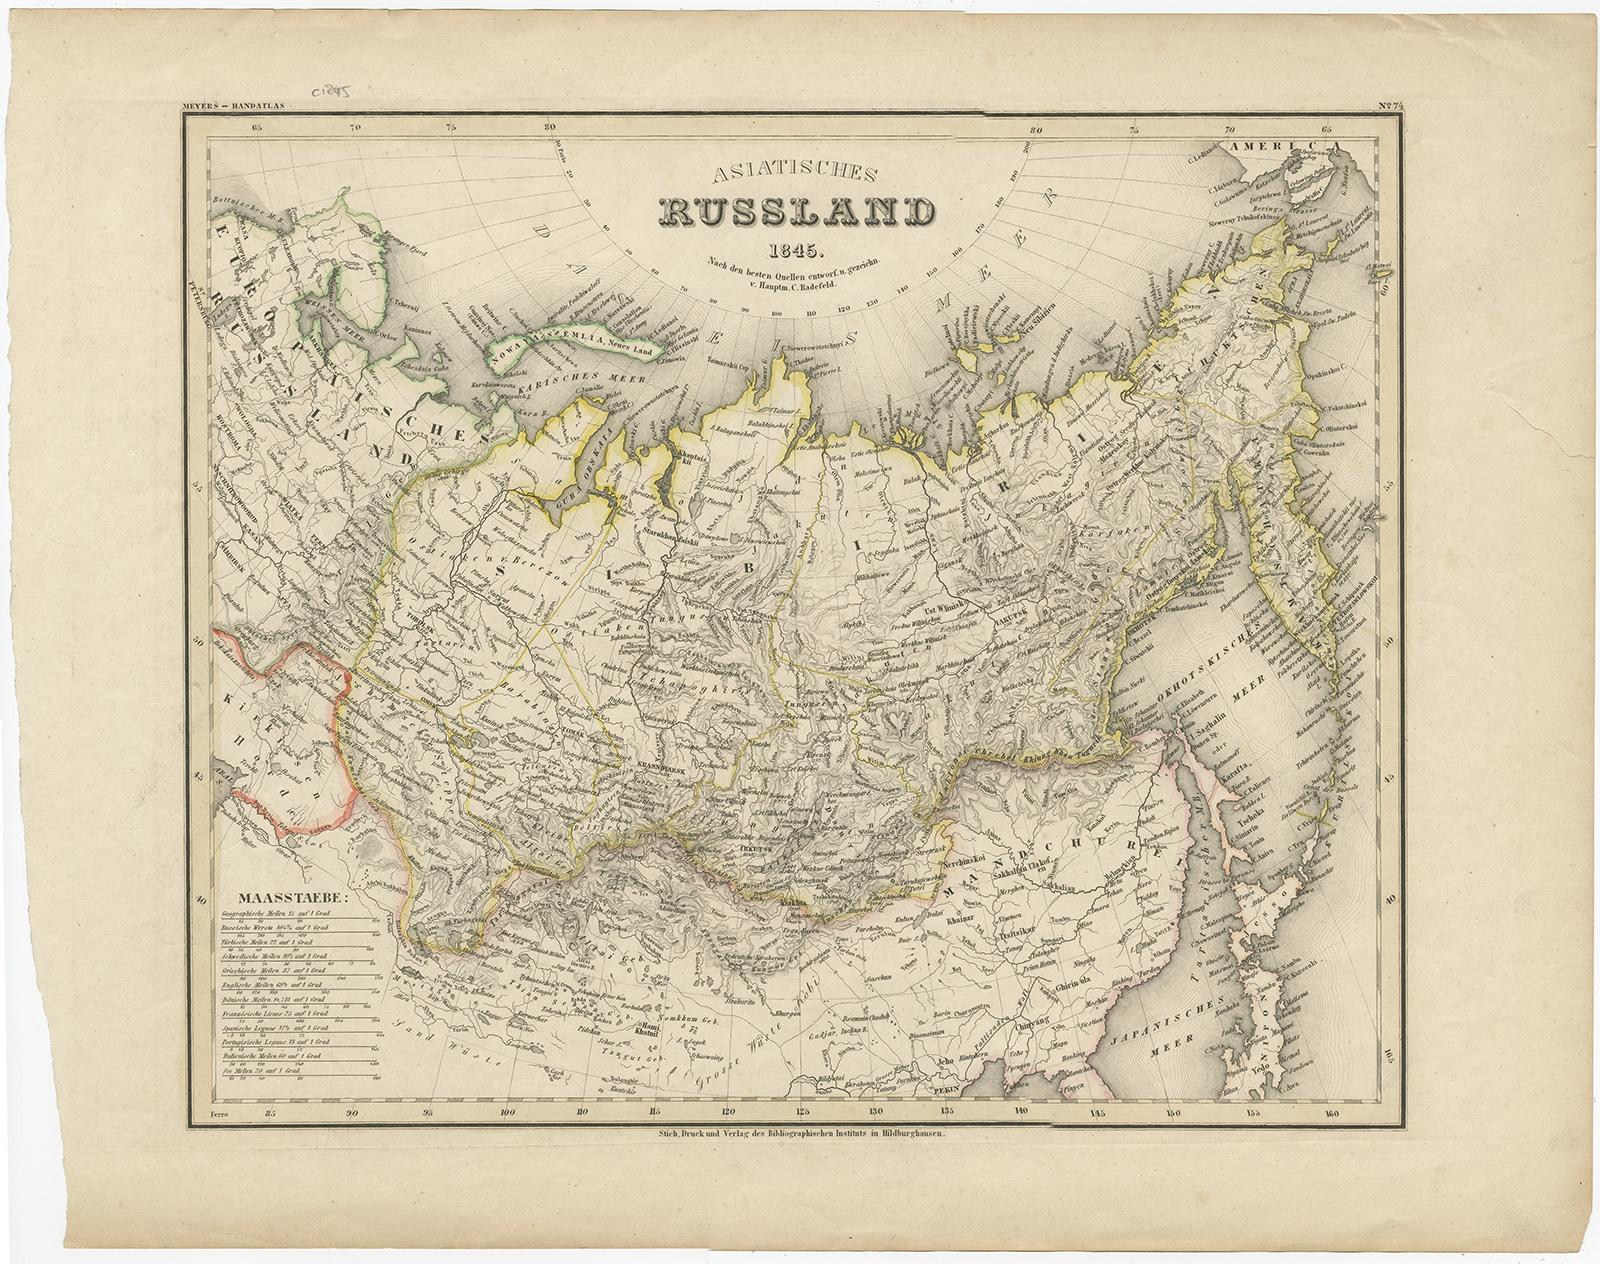 Antique map titled 'Asiatisches Russland'. This map depicts Russia in Asia and originates from 'Meyers Handatlas'. 

Artists and Engravers: Engraved and published by 'Bibliographisch Institut', Hildburghausen.

Condition: Good, general